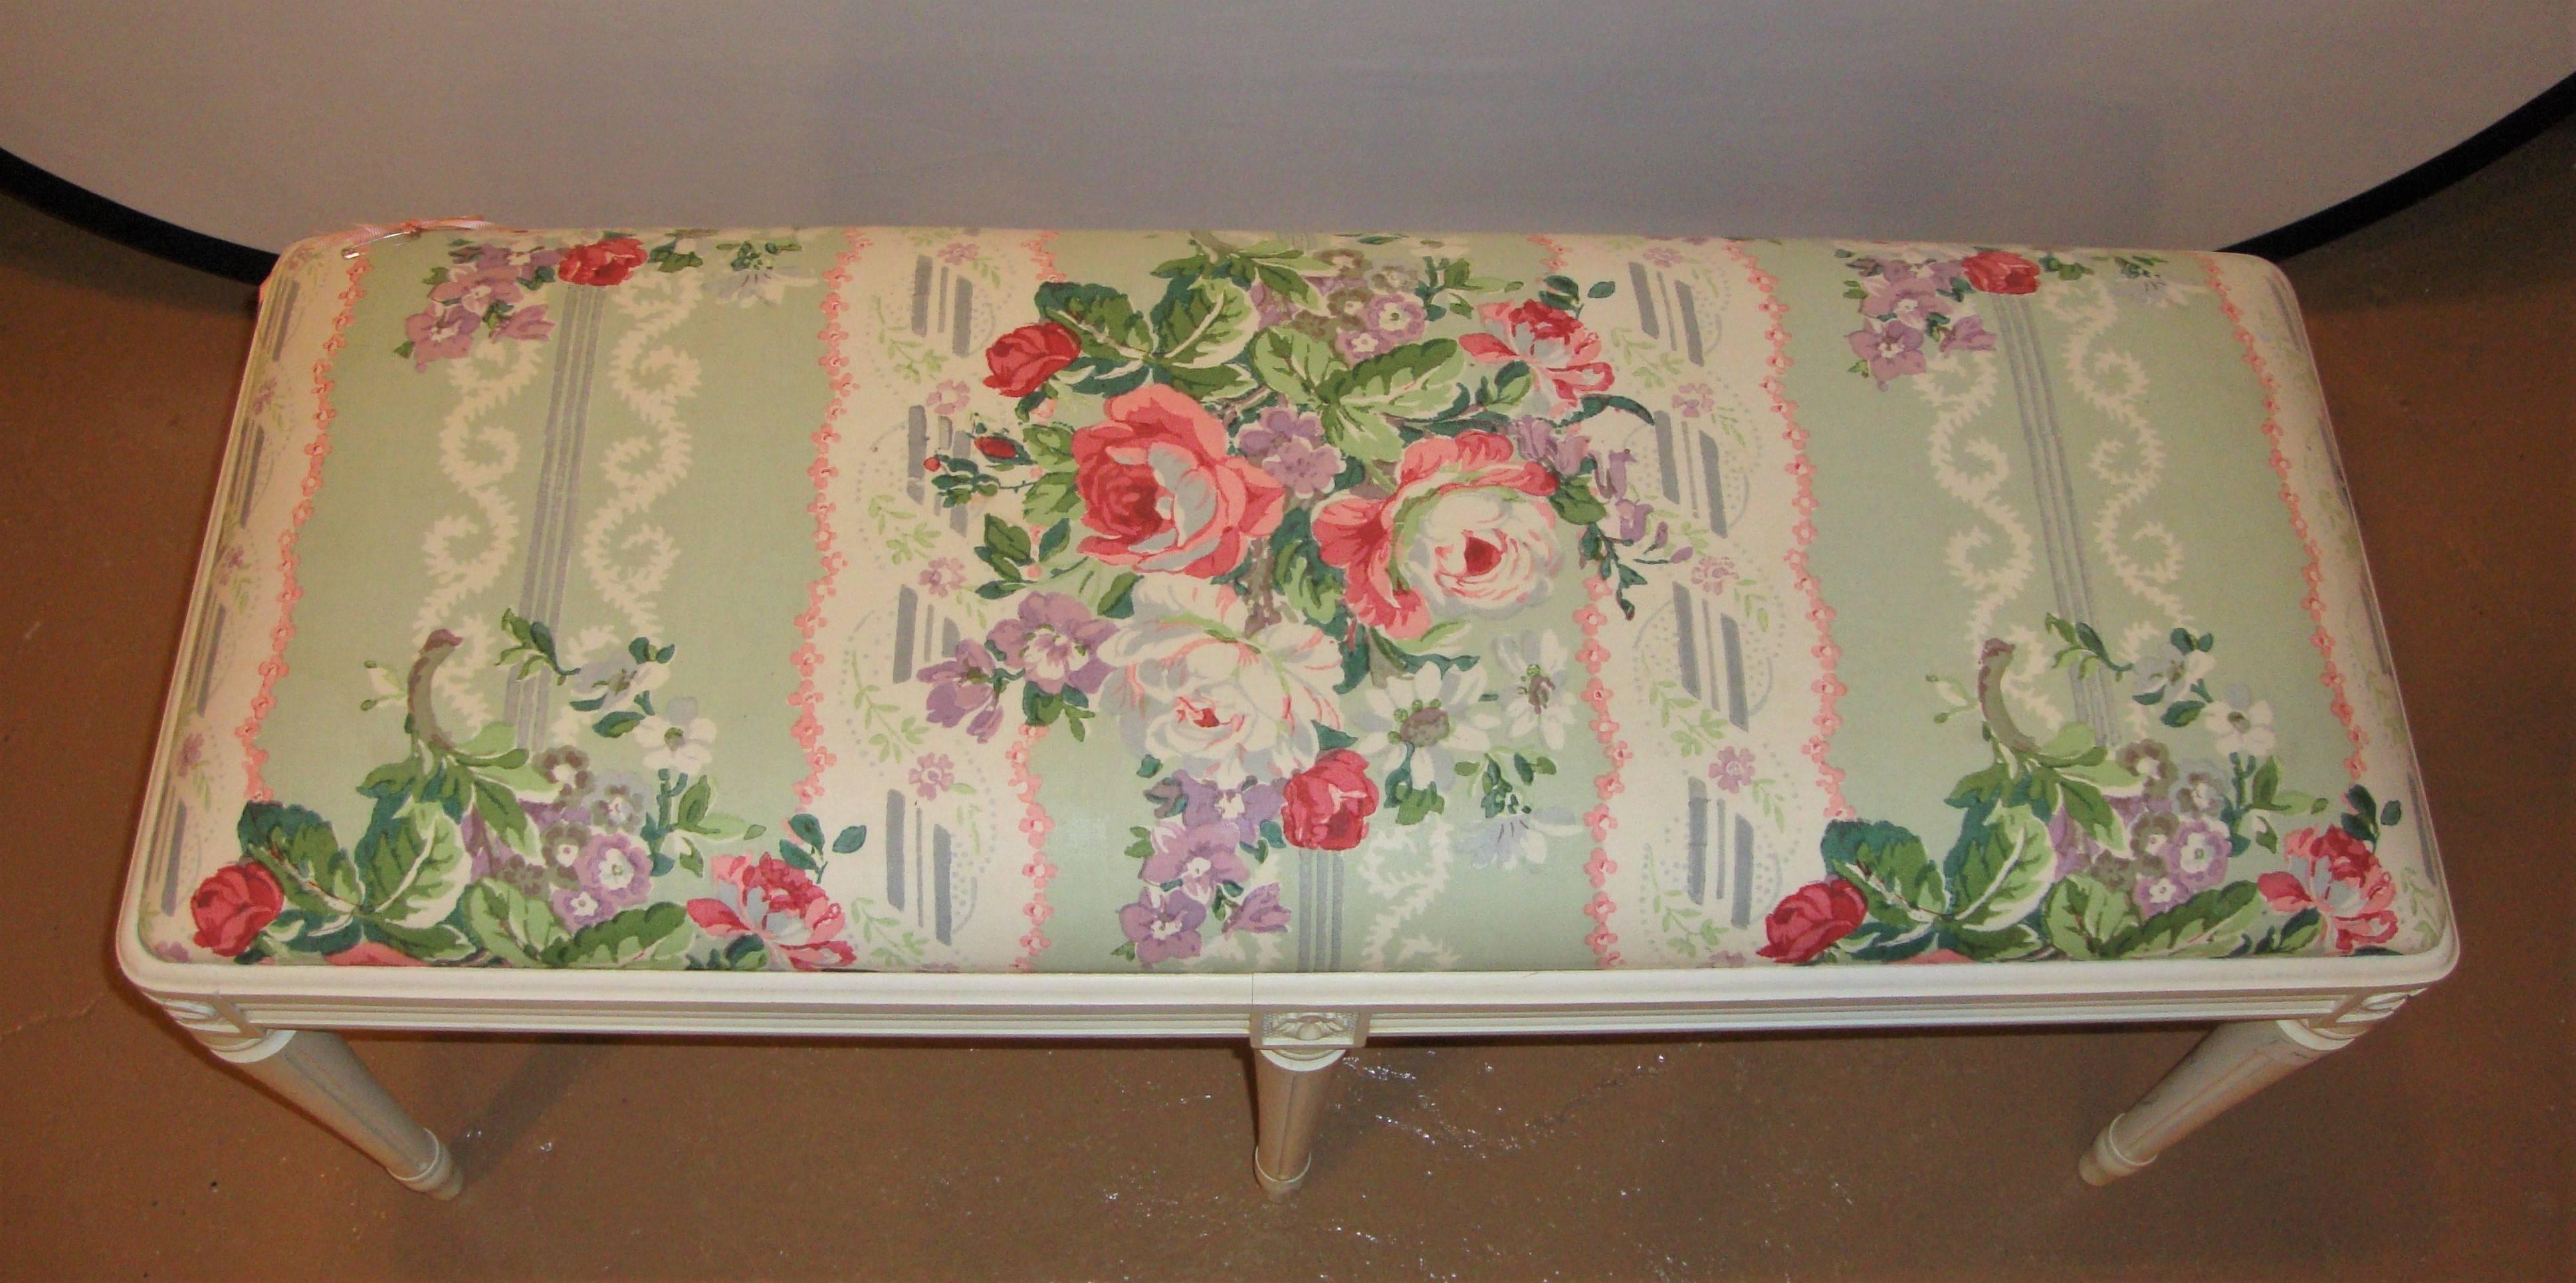 Hollywood Regency Louis XVI Style Paint Decorated Window Bench